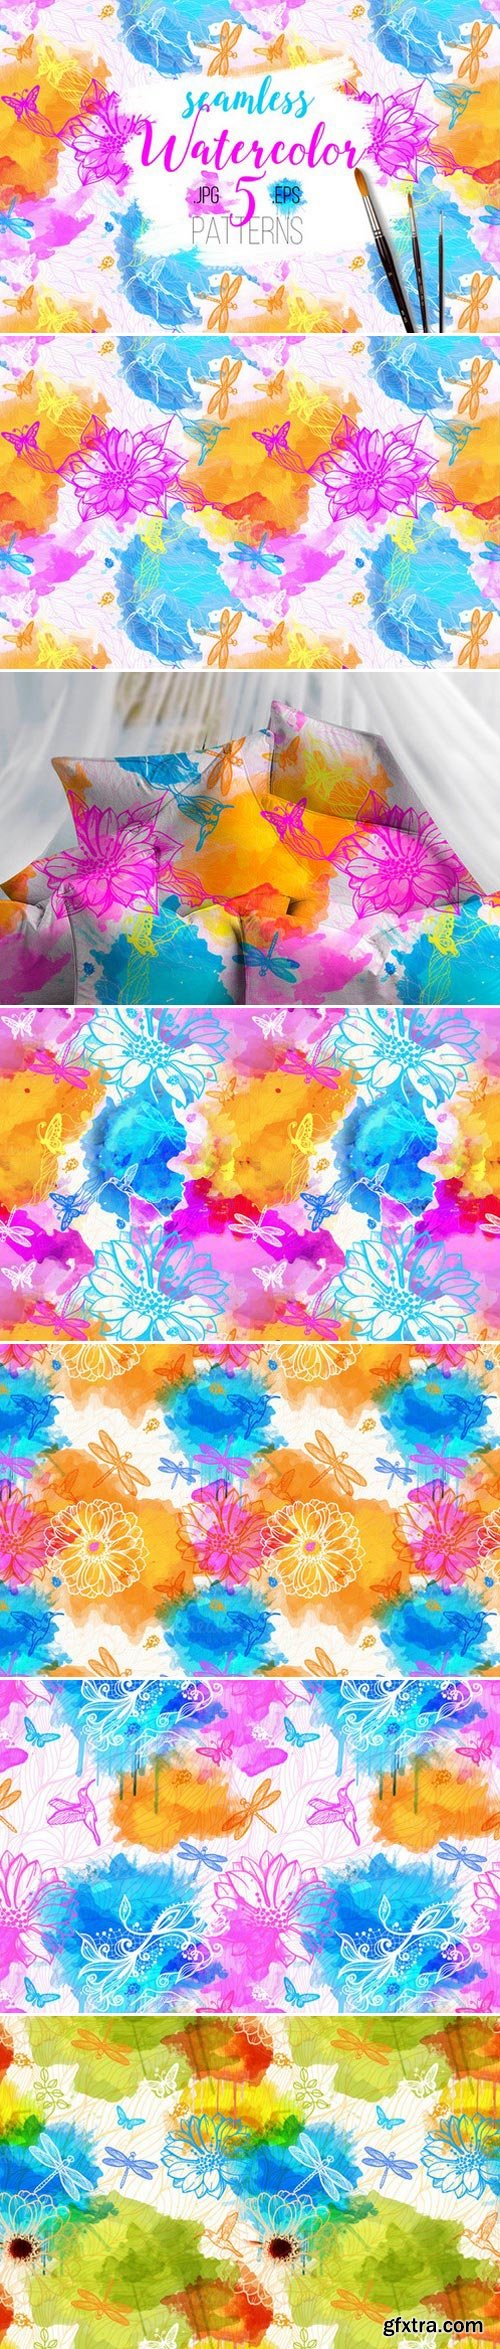 CM - Seamless watercolor patterns 432376